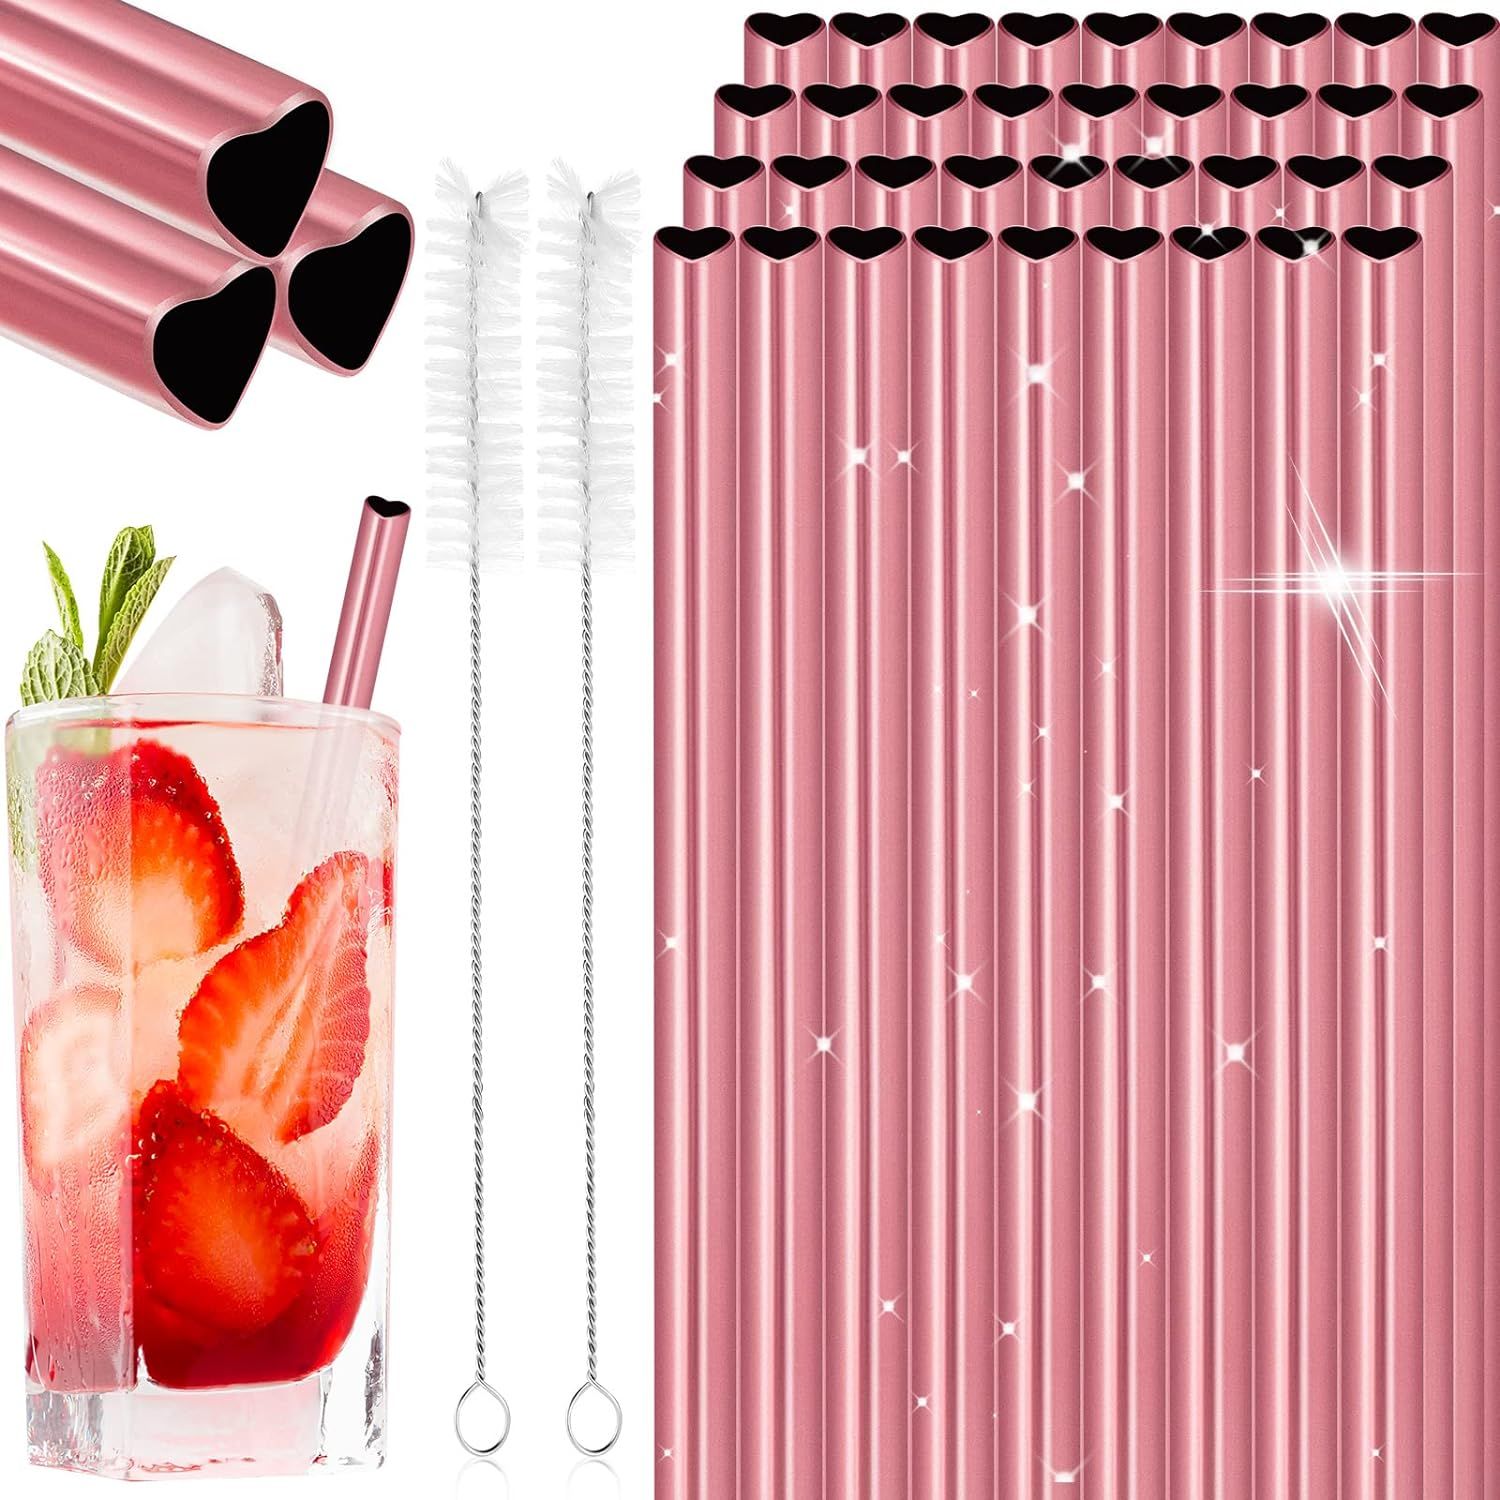 36 Pack Heart Shape Metal Straws Reusable Stainless Steel Drinking Straws with 4 Cleaning Brushes... | Amazon (US)